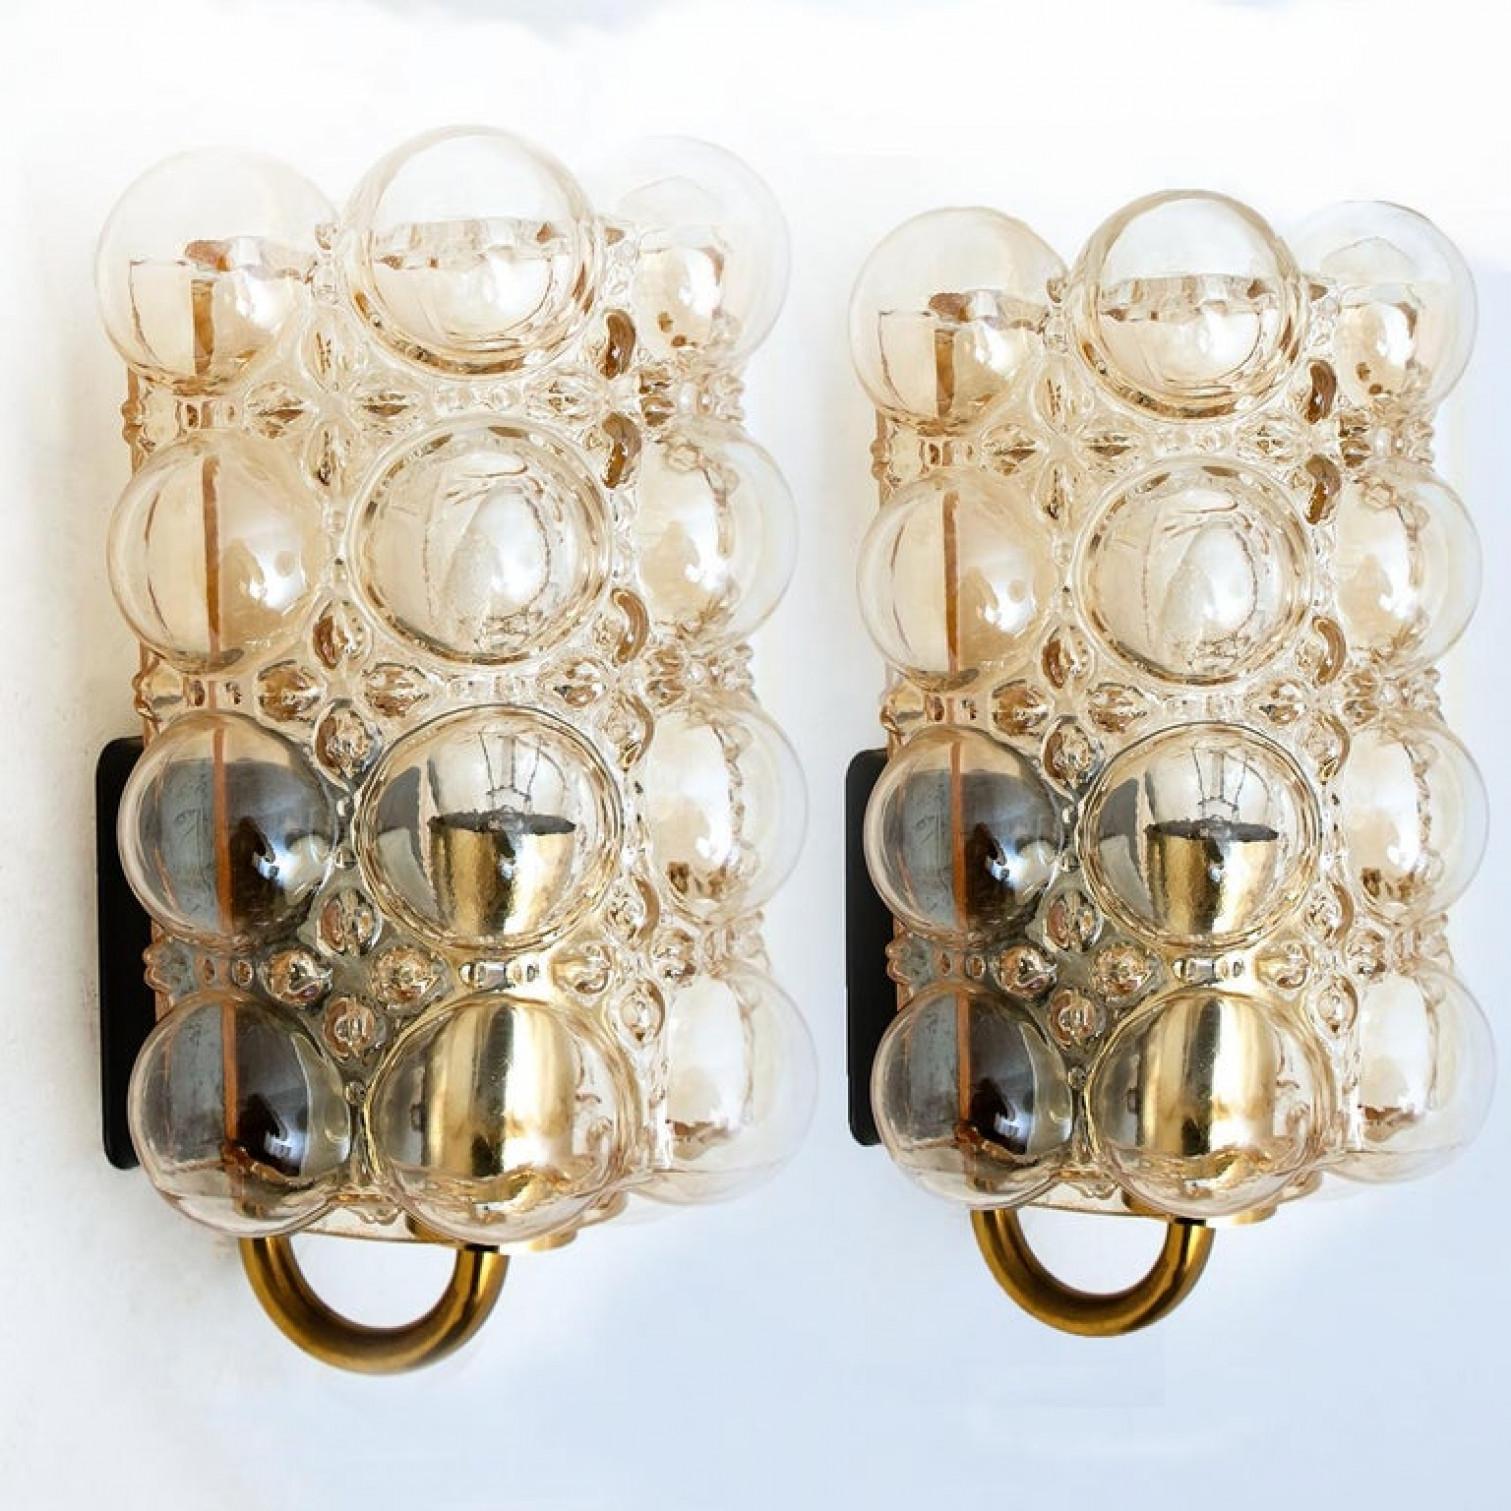 A pair of beautiful bubble glass wall lights designed by Helena Tynell for Glashütte Limburg. A design Classic, the amber colored or toned of the hand blown glass gives a wonderful and warm glow.xa0

Heavy quality and in excellent vintage condition.